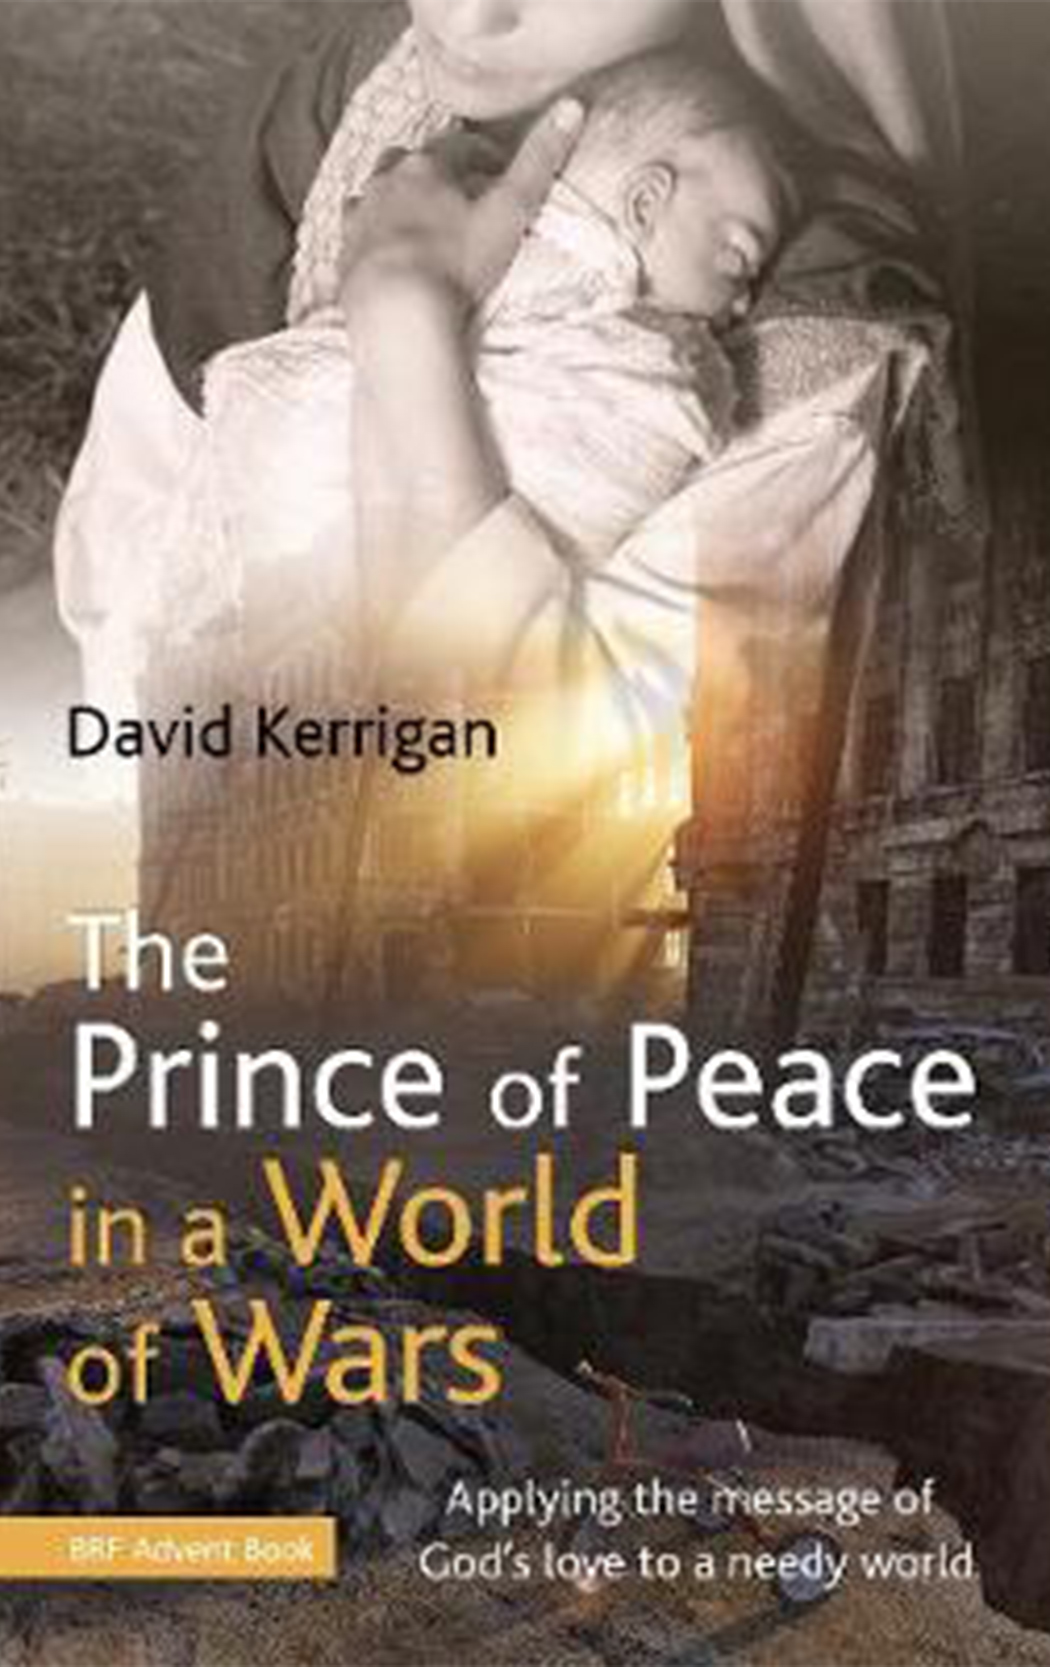 The Prince of Peace in a world of wars